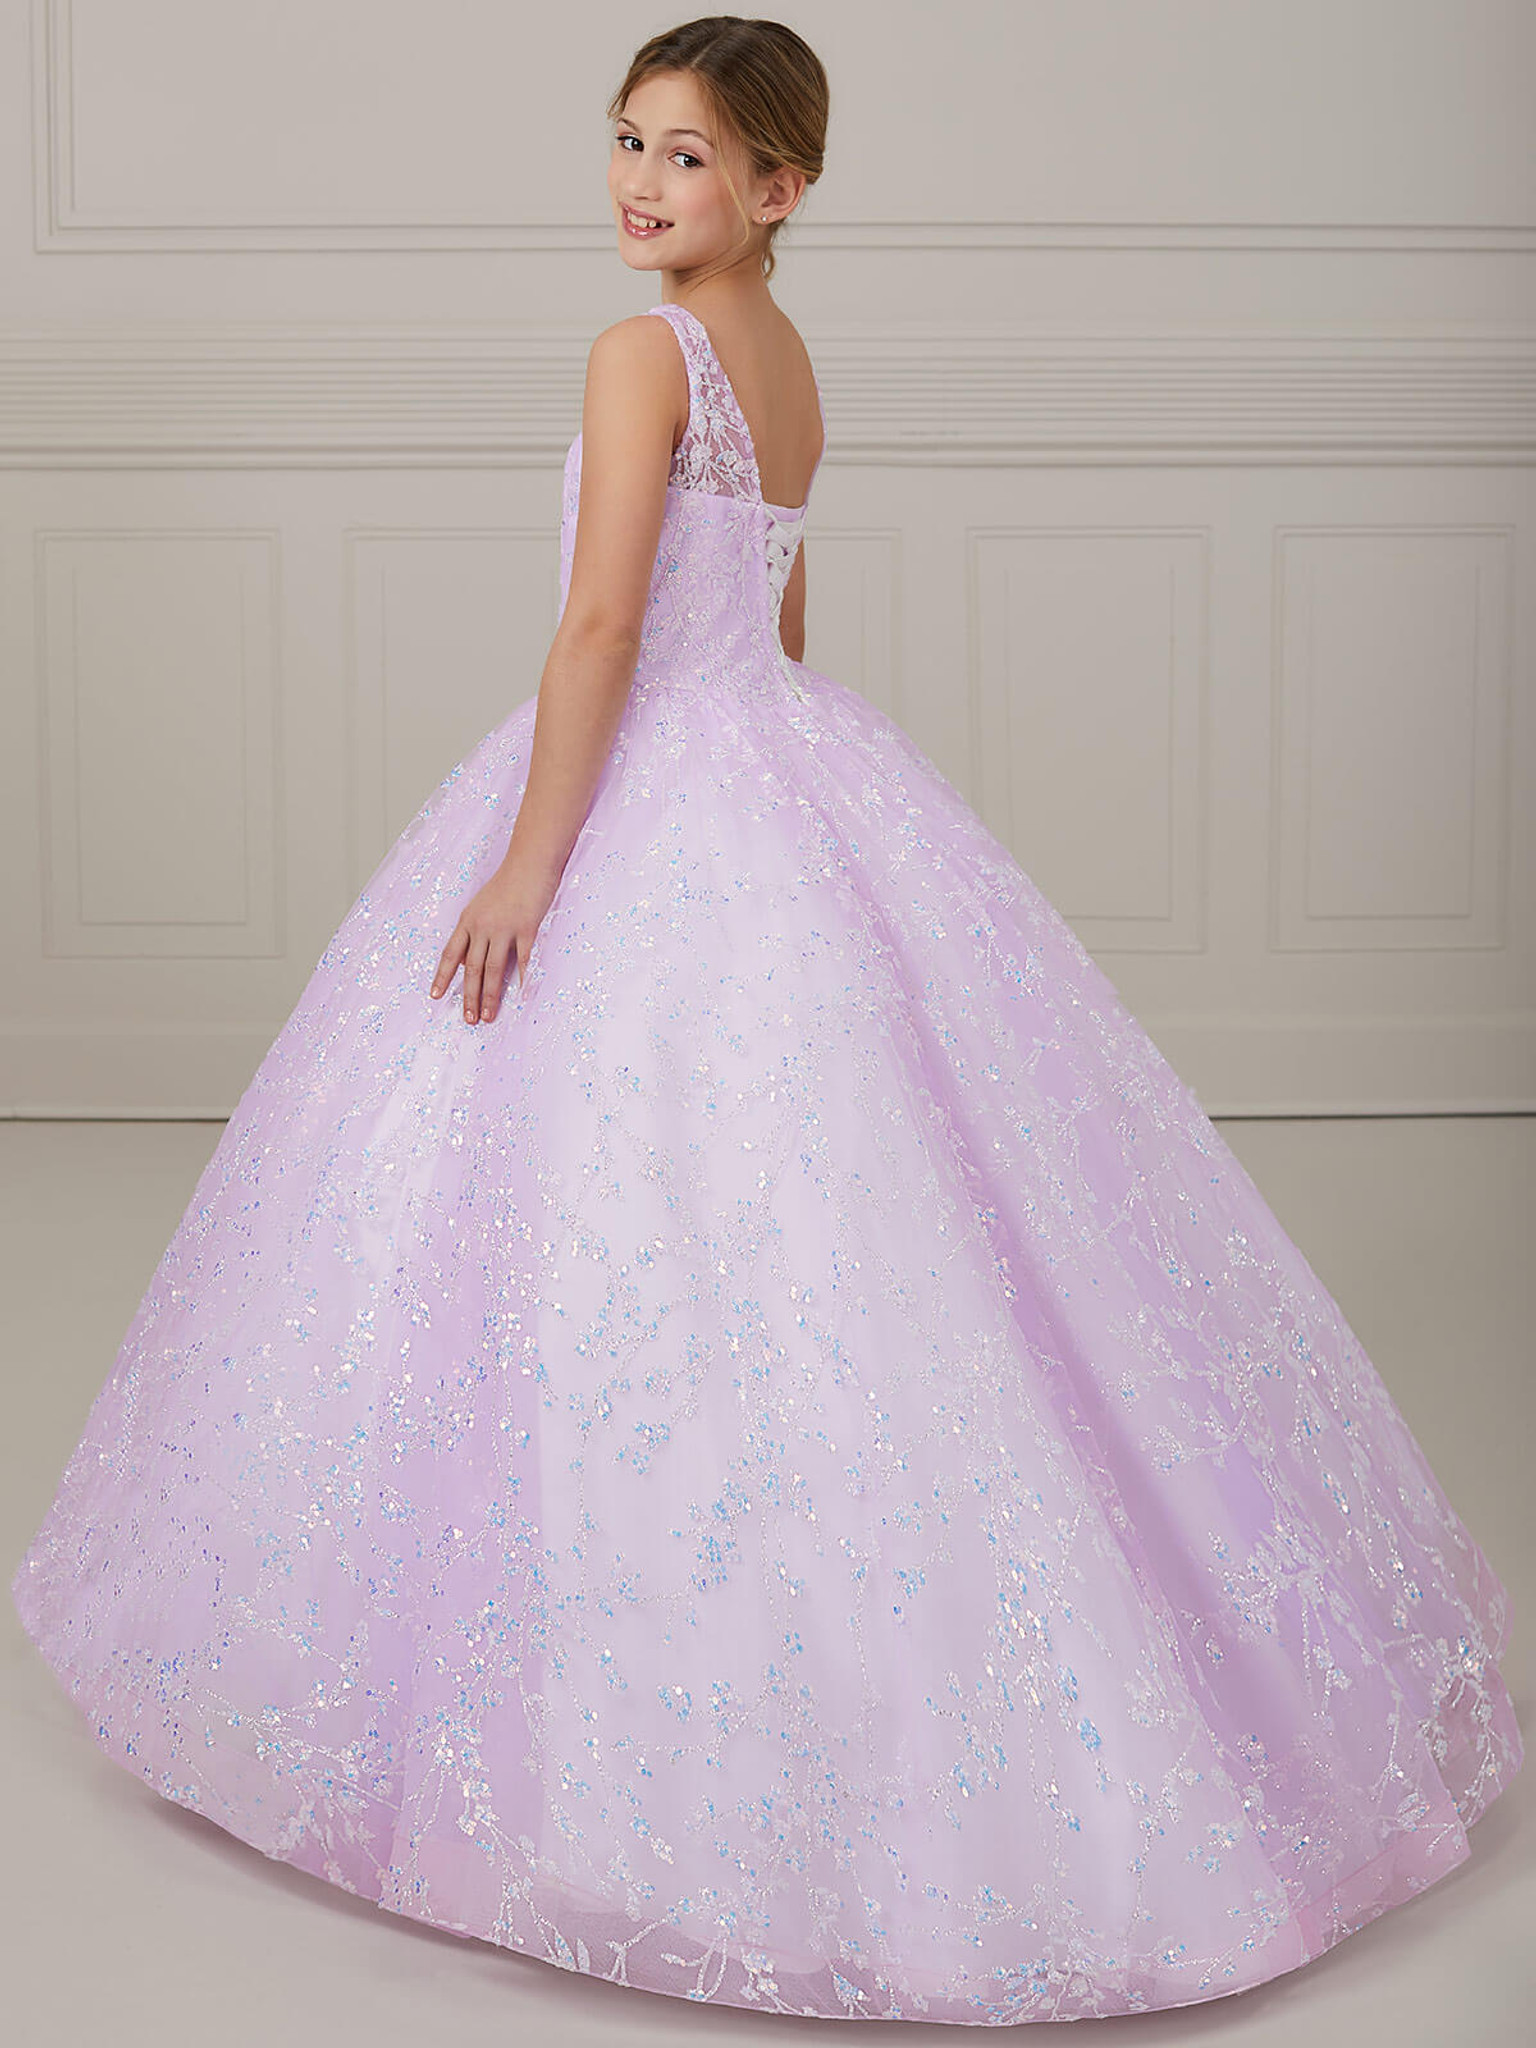 Ball Gown Girls Pageant Dress Tiffany Princess 13643